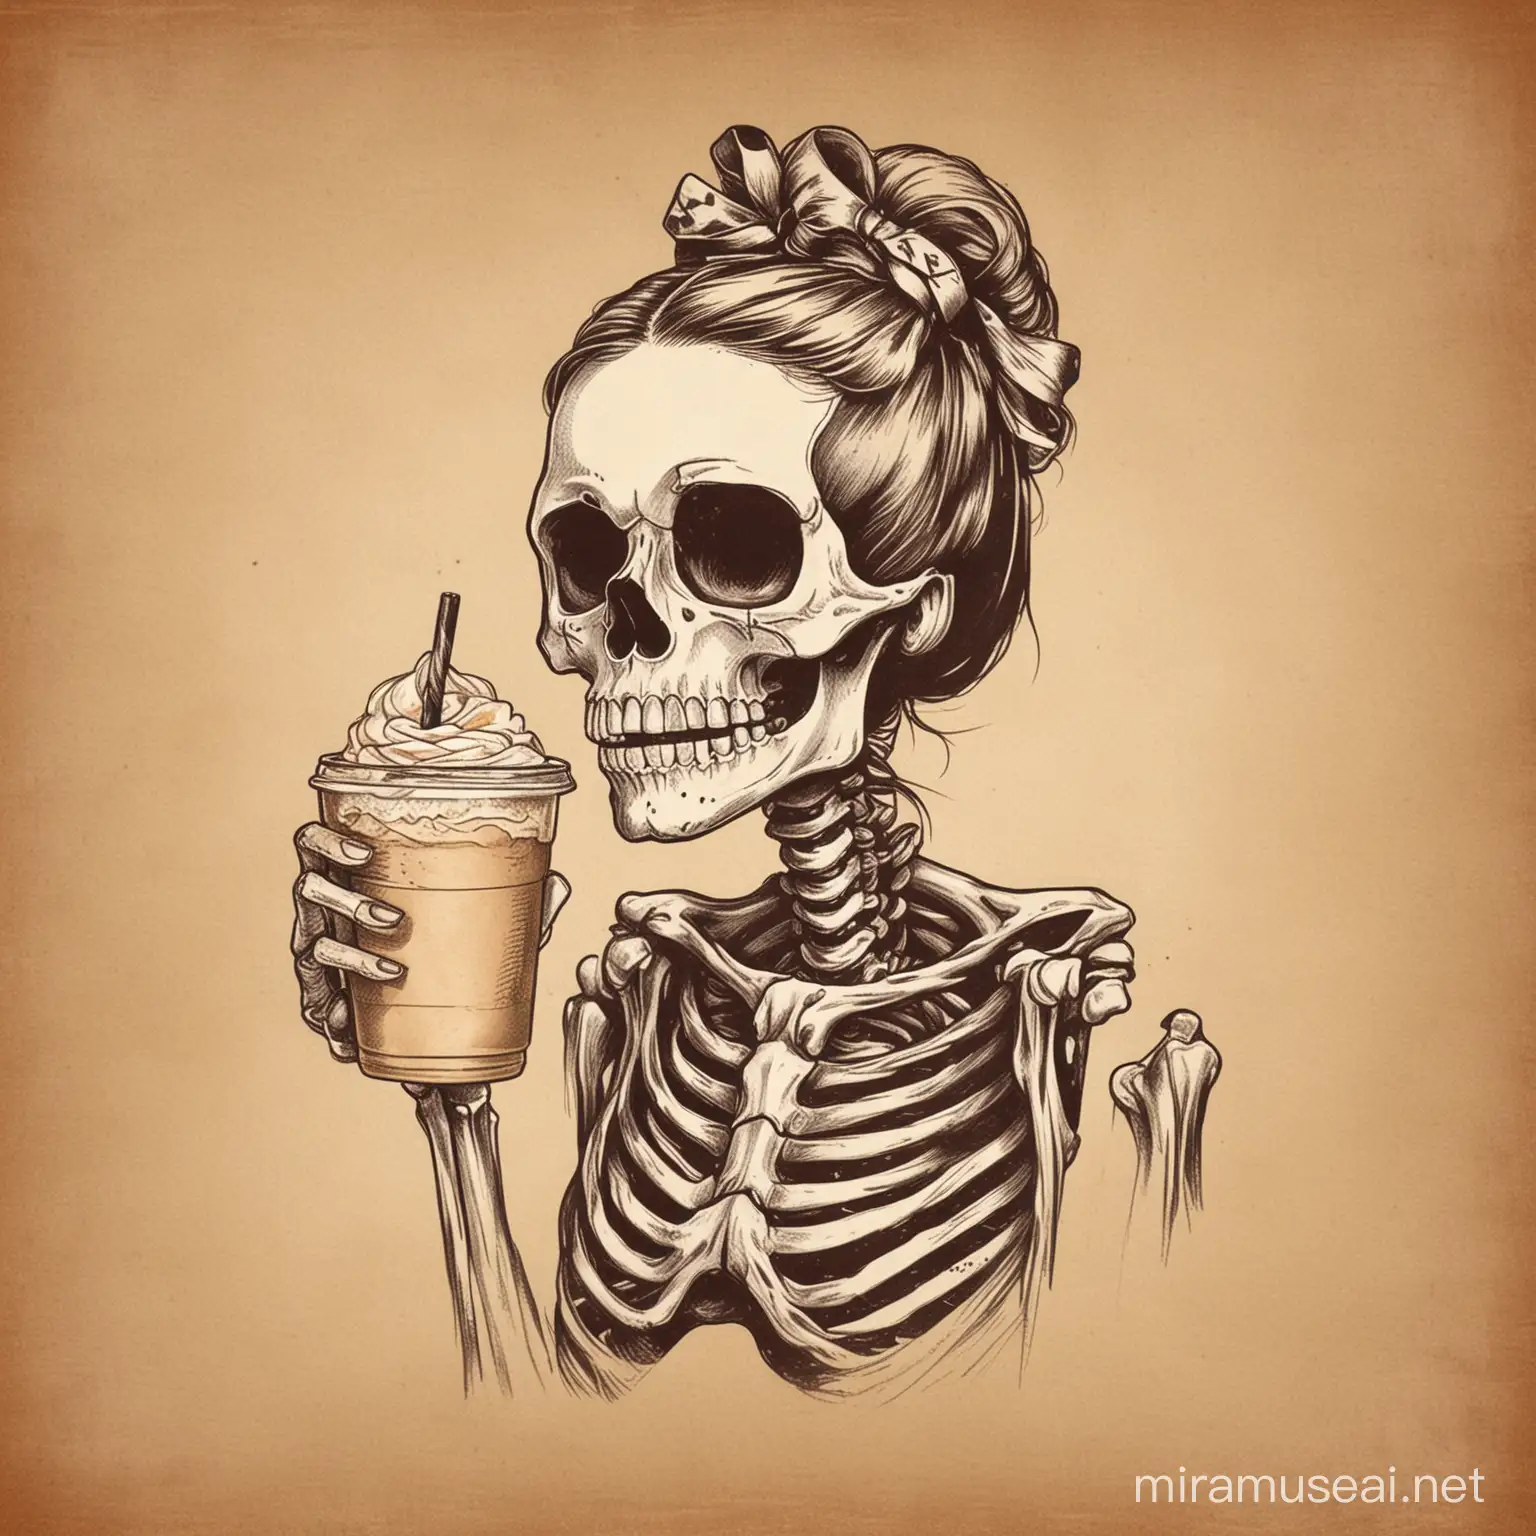 Vintage poster design, stencils, simple, minimalism, vector art, Sketch drawing, flat, 2d, a skeleton with hair in a bun on his head, head Hollywood style bow bandana,drawing drawing of skeleton with four fingers and thumb drinking large iced coffee raised to mouth sucking into straw, tatto design, Vector illustrations